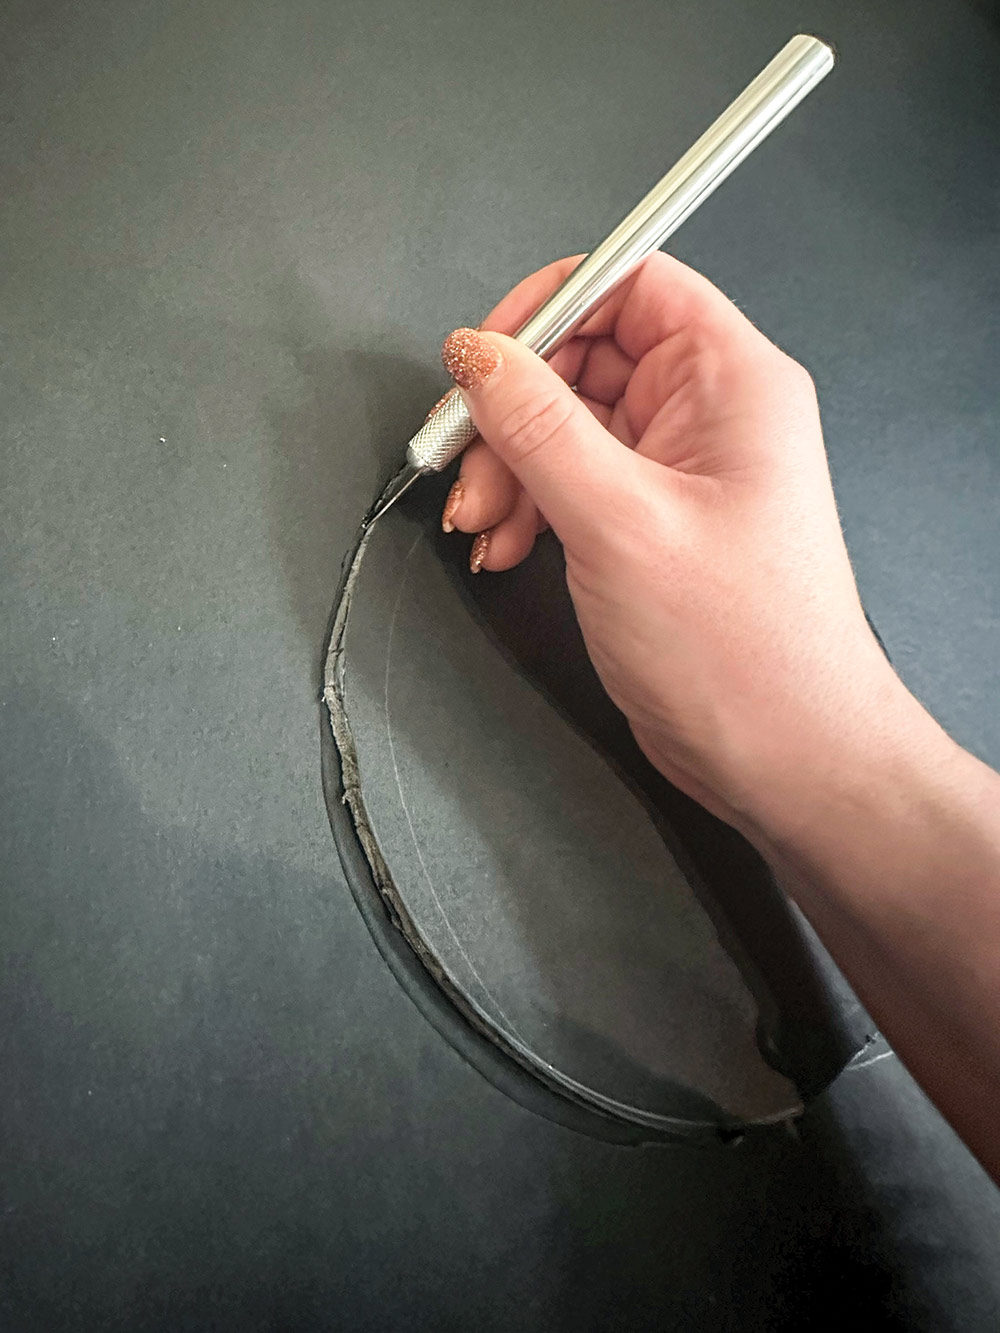 Close-up portrait photograph perspective of a person using an X-Acto Knife to cut out a circle shape on the Black Tri-fold Foam Presentation Board